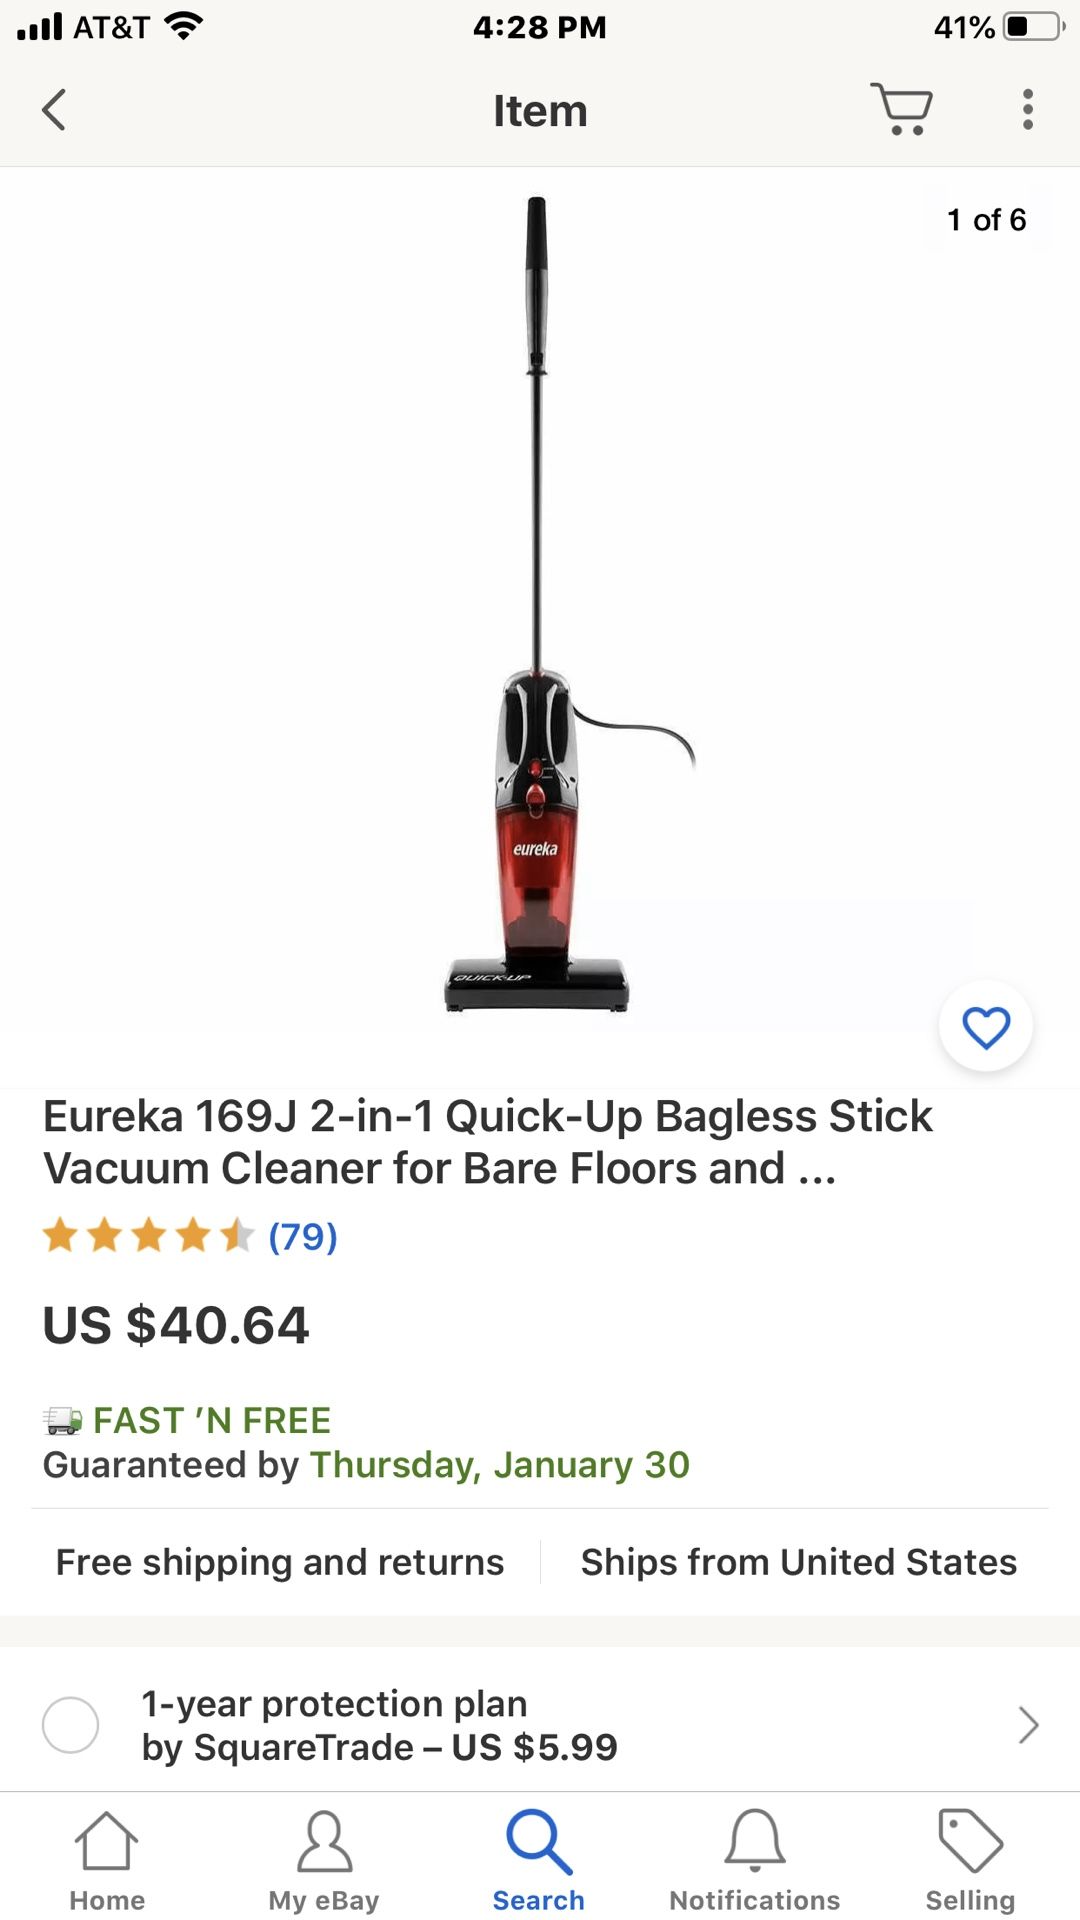 Eureka 169J 2-in-1 Quick-Up Bagless Stick Vacuum Cleaner for Bare Floors and ...